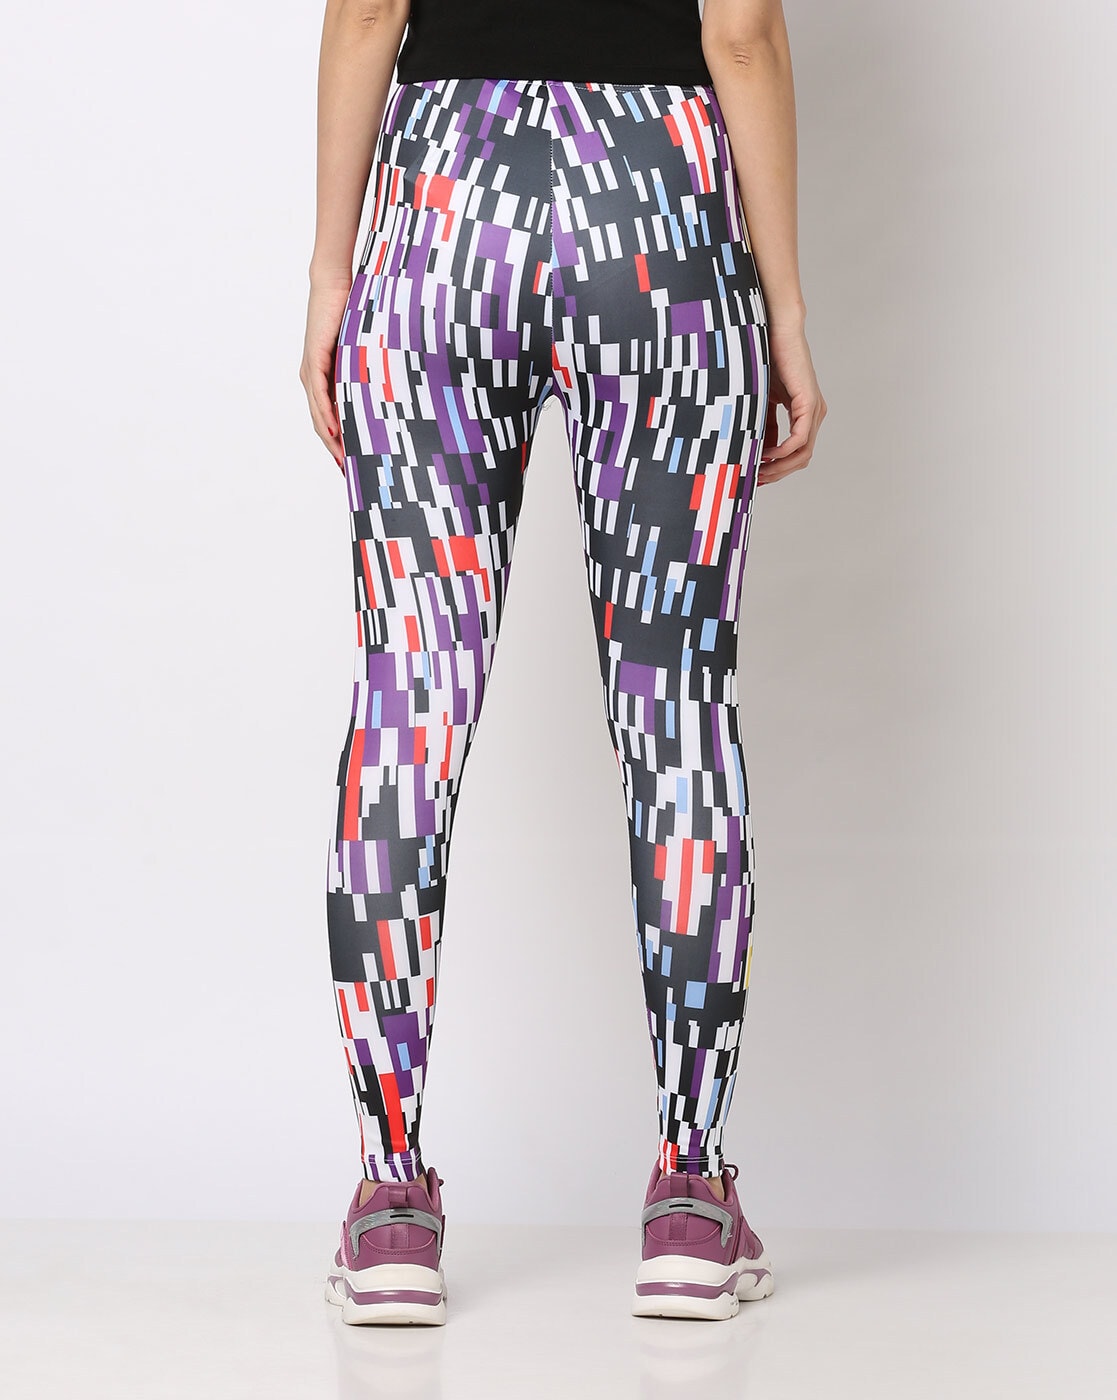 Watercolor Yoga Heel Support In Printed Leggings Ankle length for Women-  Black and Fuschia – MICHELLE SALINS